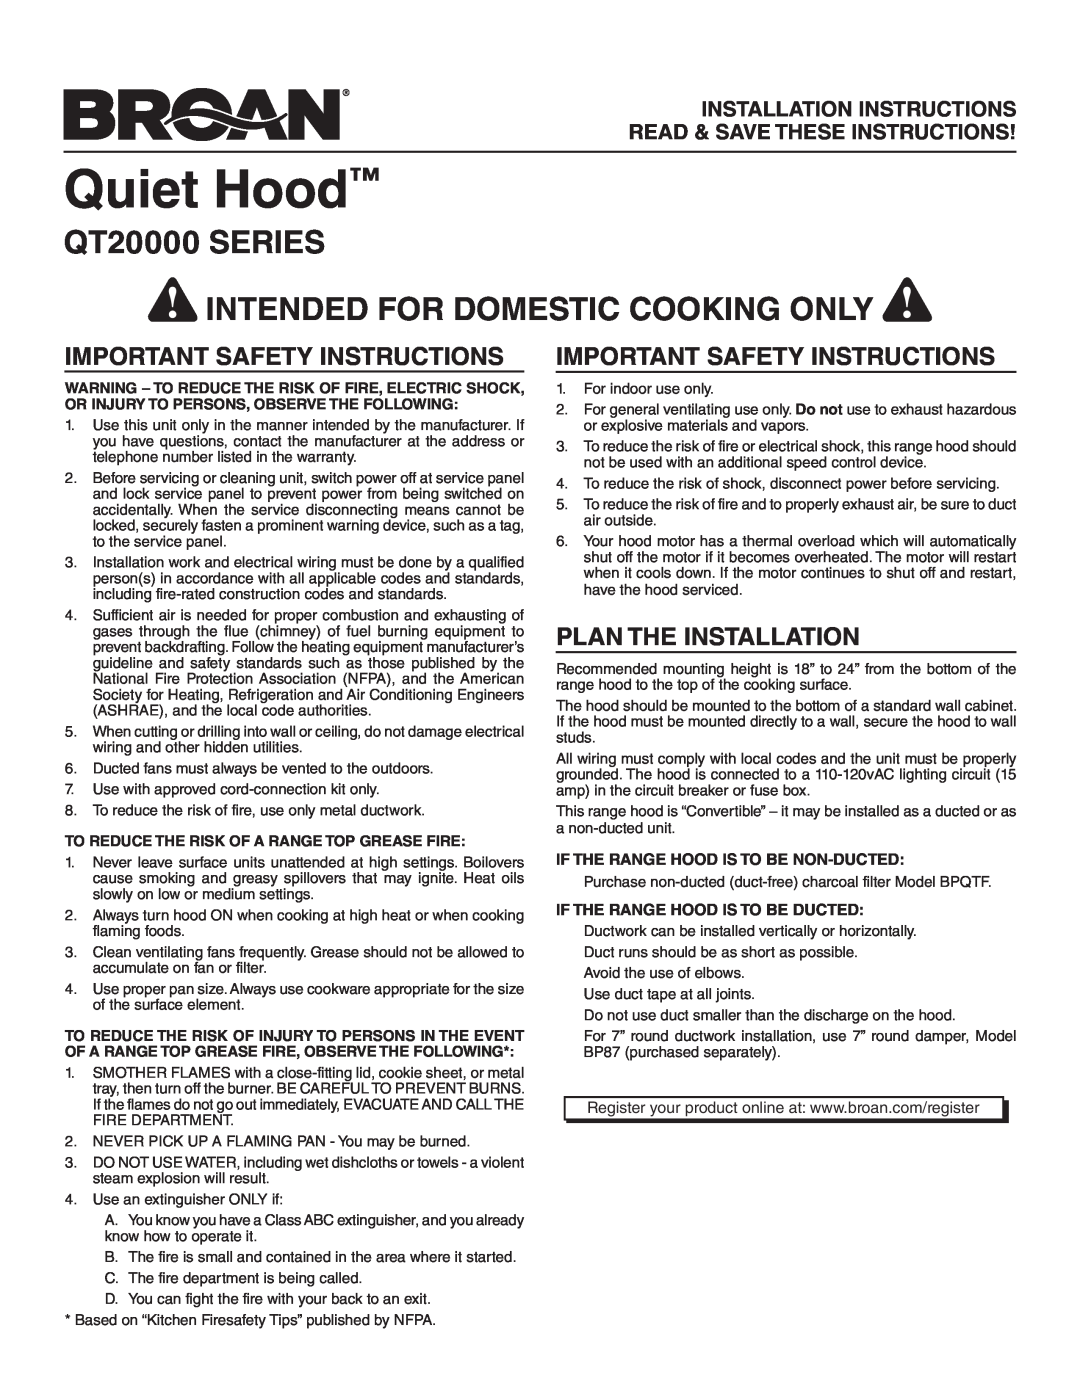 Broan QT230WW installation instructions Quiet Hood, QT20000 SERIES INTENDED FOR DOMESTIC COOKING ONLY 